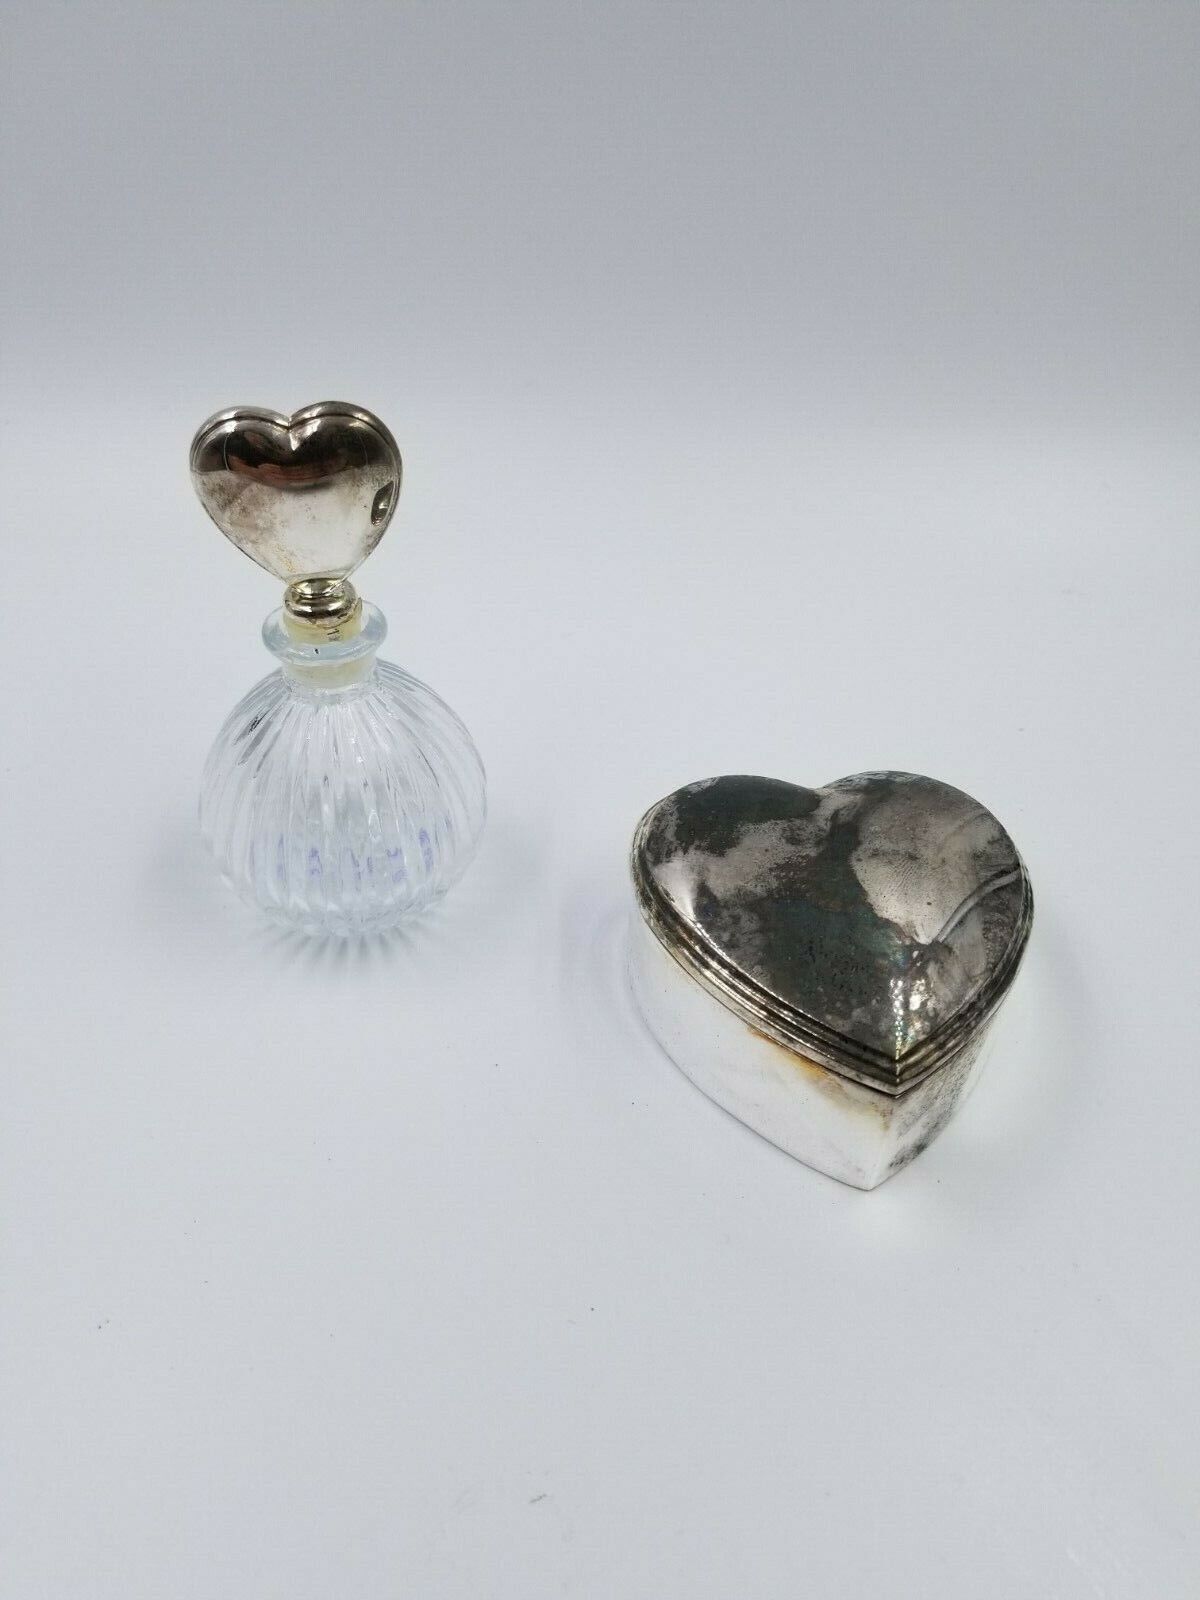 SILVER PLAITED Perfume Bottle and Heart Shaped Trinket Box. Old with Patina.